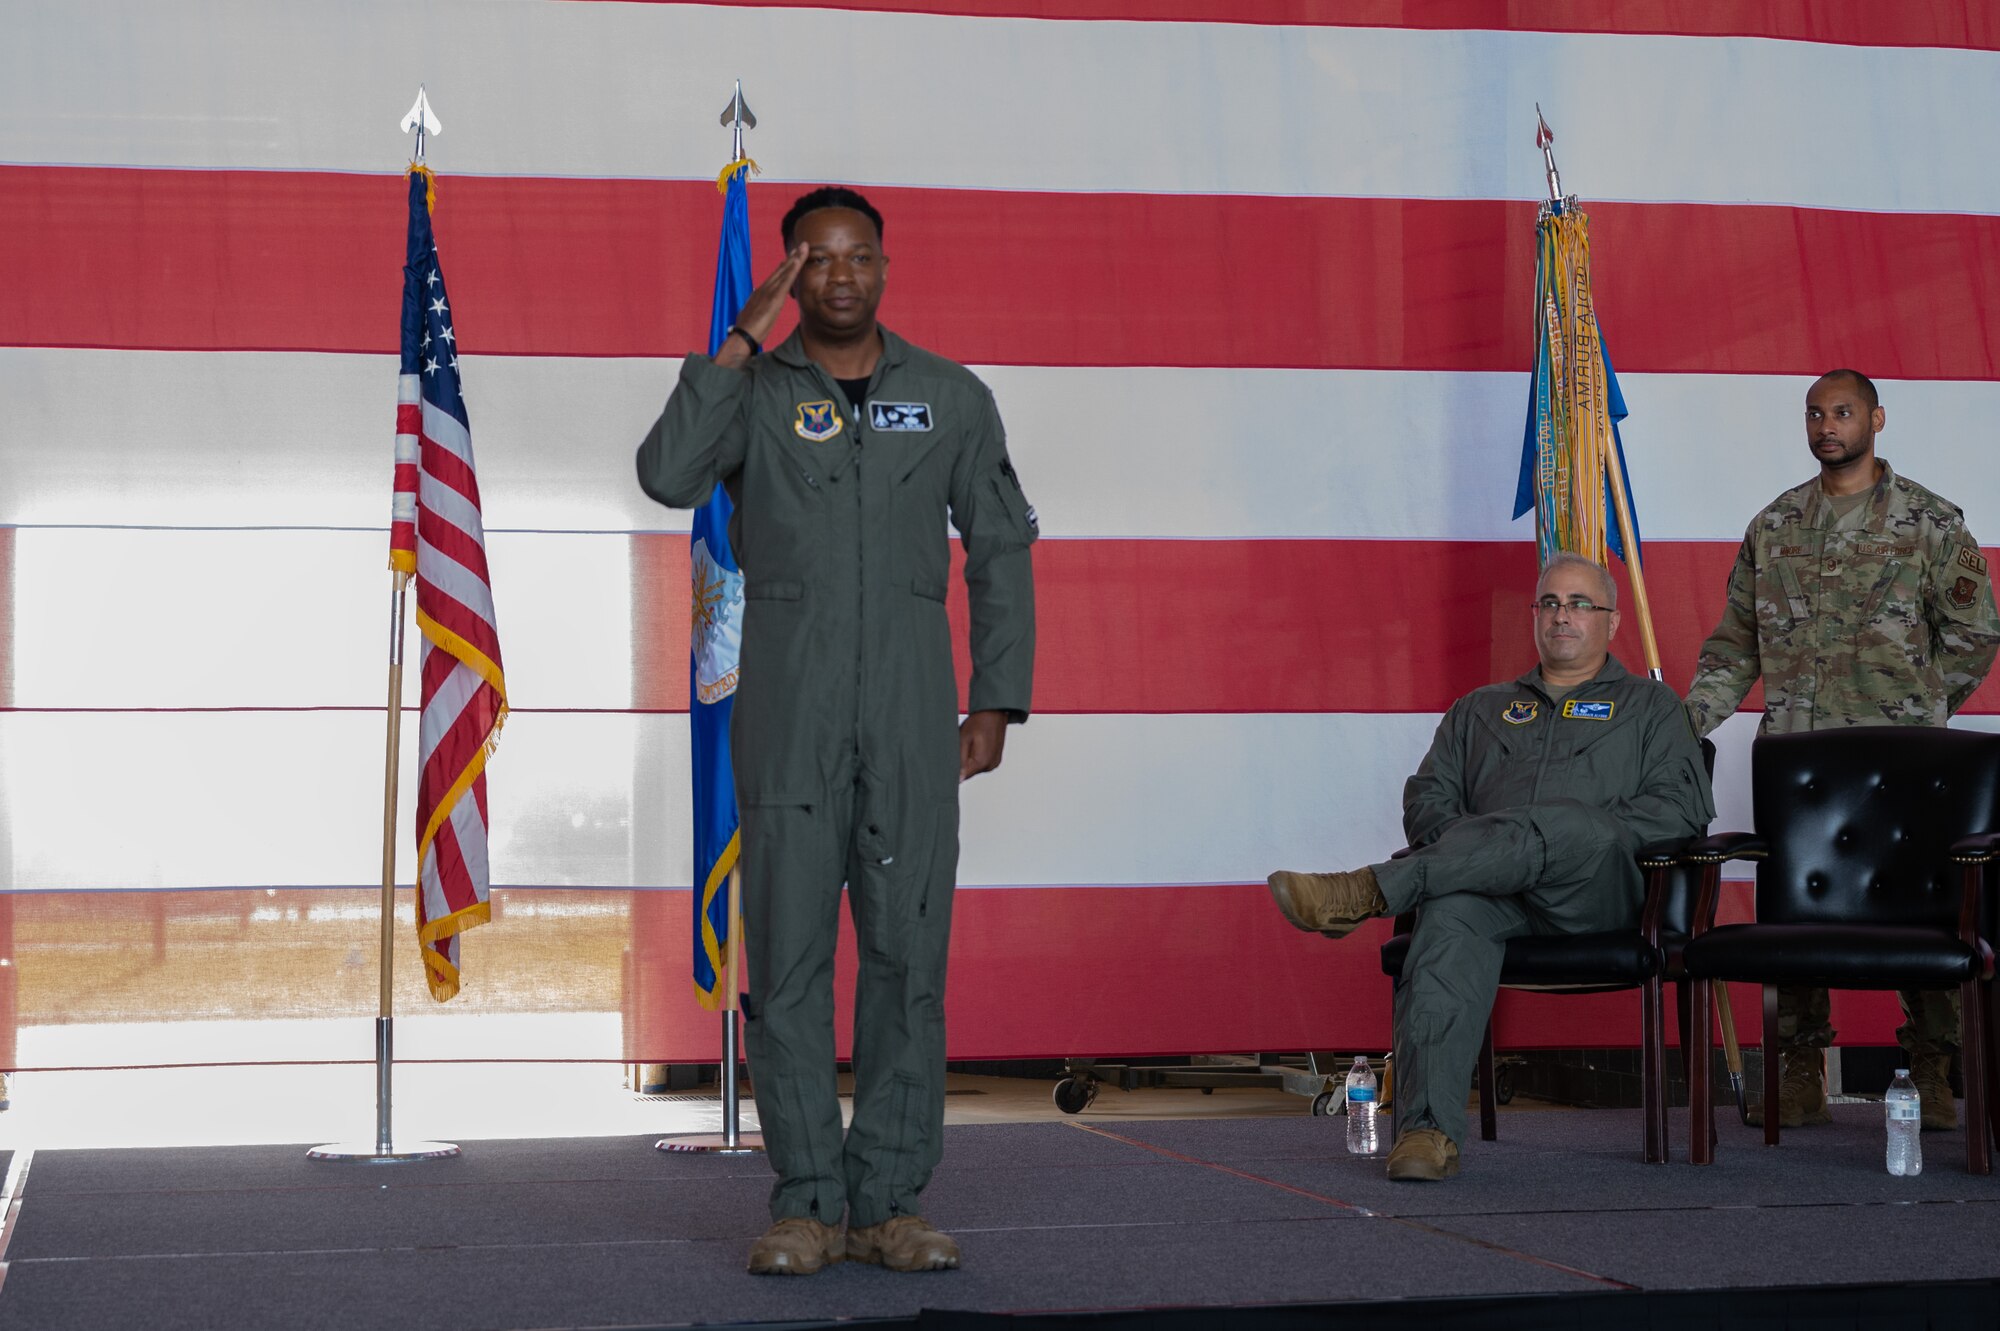 U.S. Air Force Lt. Col. Brian Milner, 9th Bomb
Squadron commander, renders his first salute during
the 9th BS change of command at Dyess Air Force
Base, Texas, July 7, 2023. Milner is in charge of
leading the 9th BS which is the oldest active bomb
squadron in the Air Force and maintains combat
readiness to ensure delivery of rapid and decisive
airpower on a large scale in support of conventional
warfare taskings around the world. (U.S. Air Force
photo by Airman 1st Class Alondra Cristobal
Hernandez)